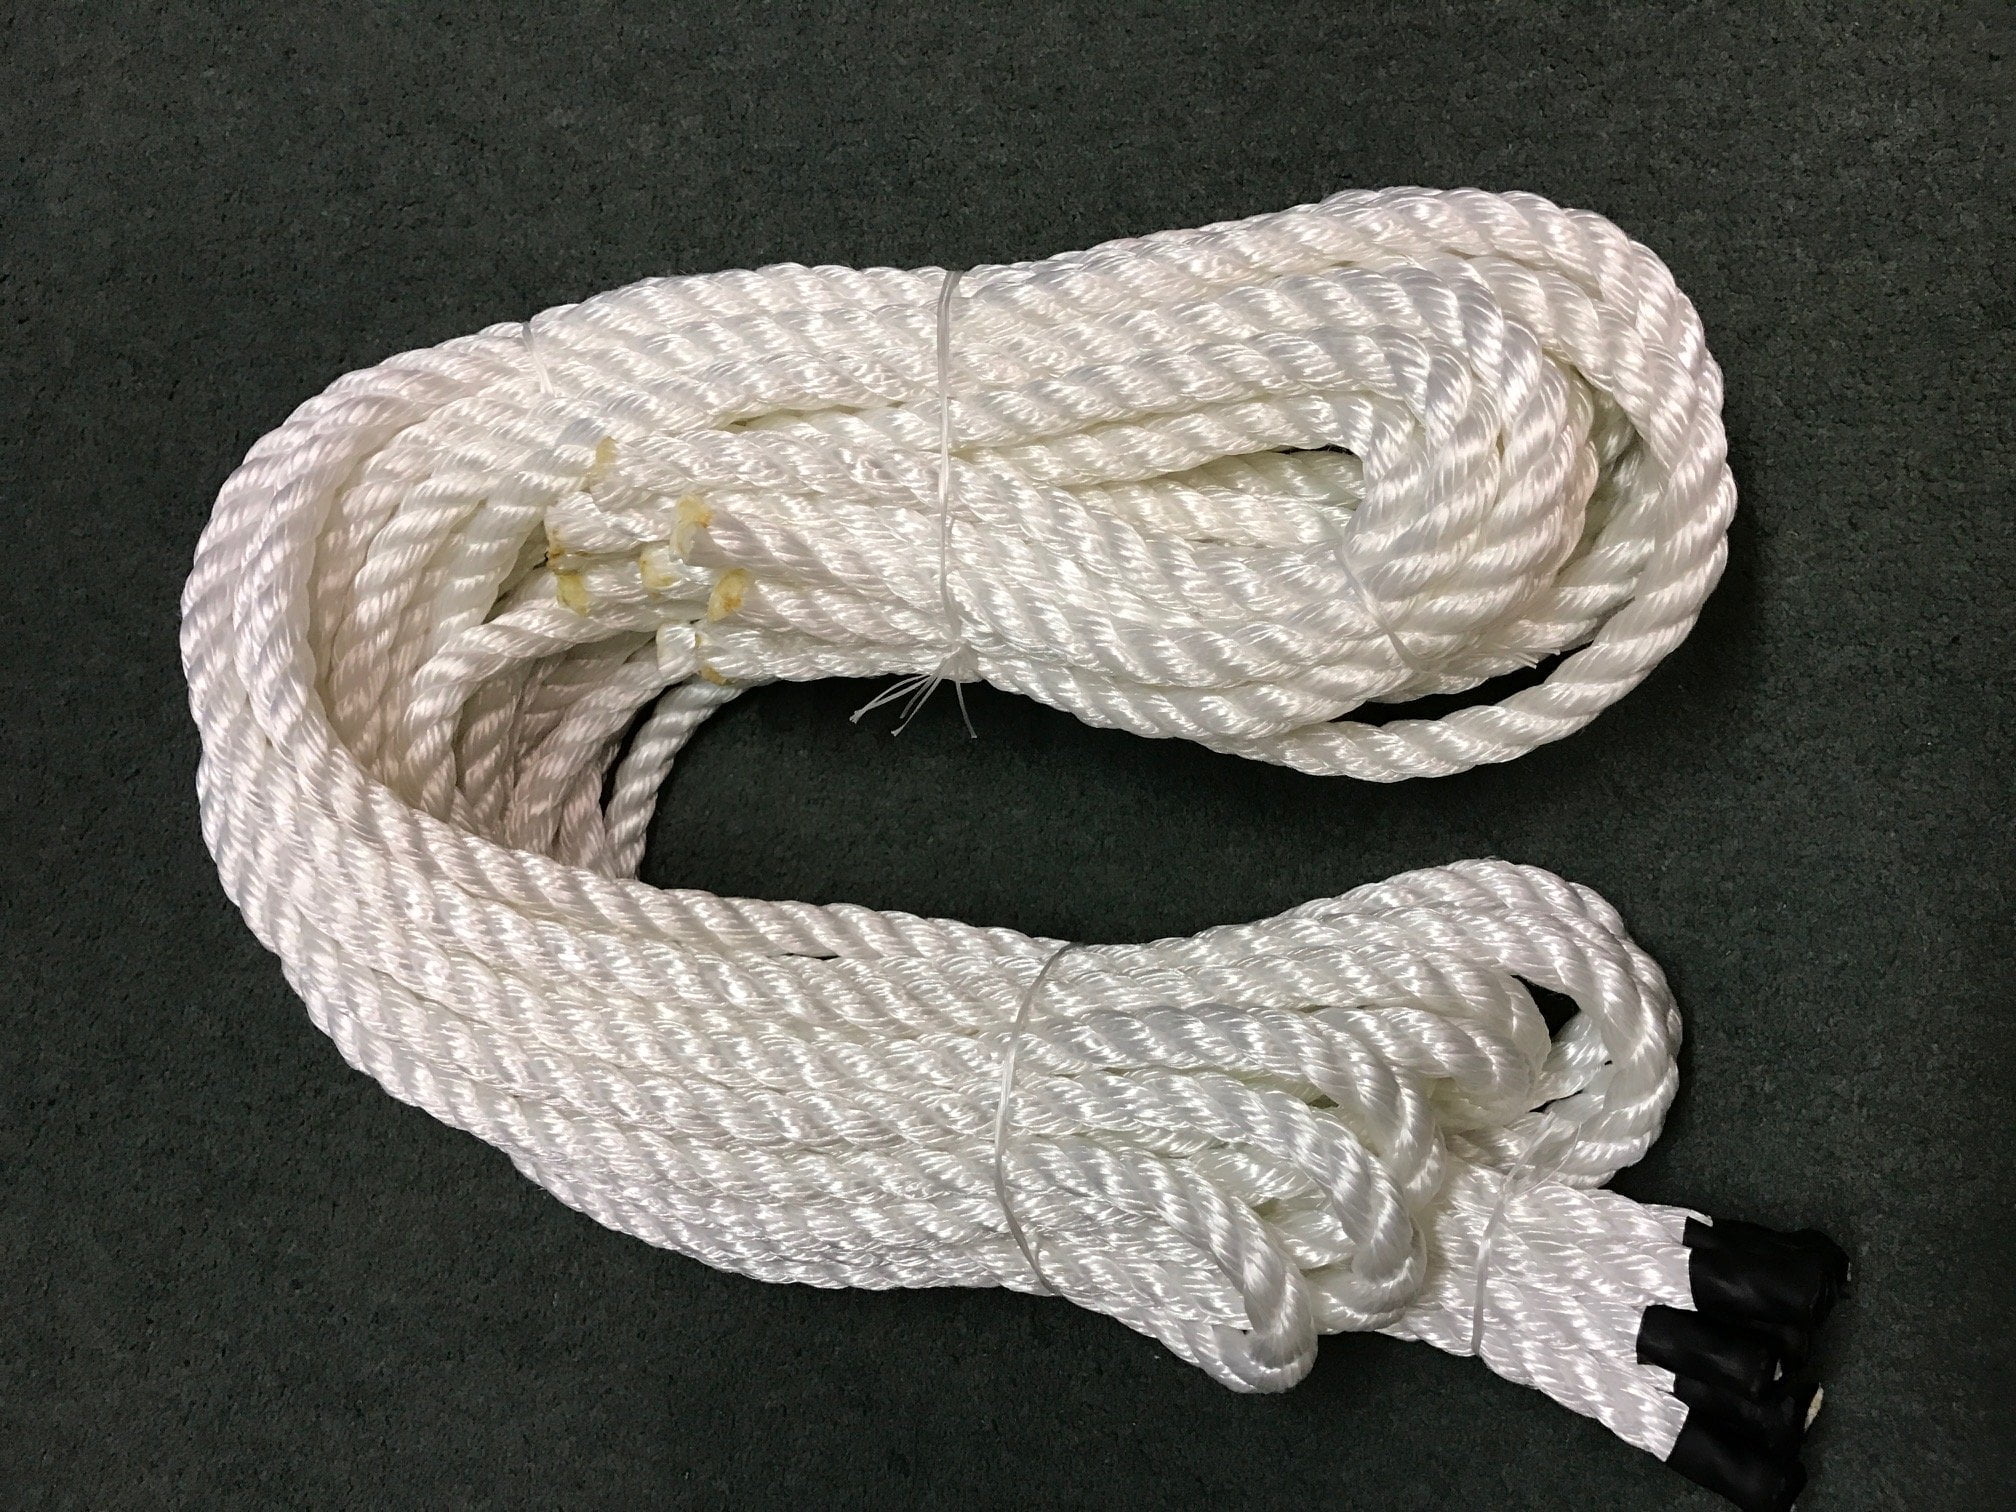 20 x 30kn Rigging Ropes